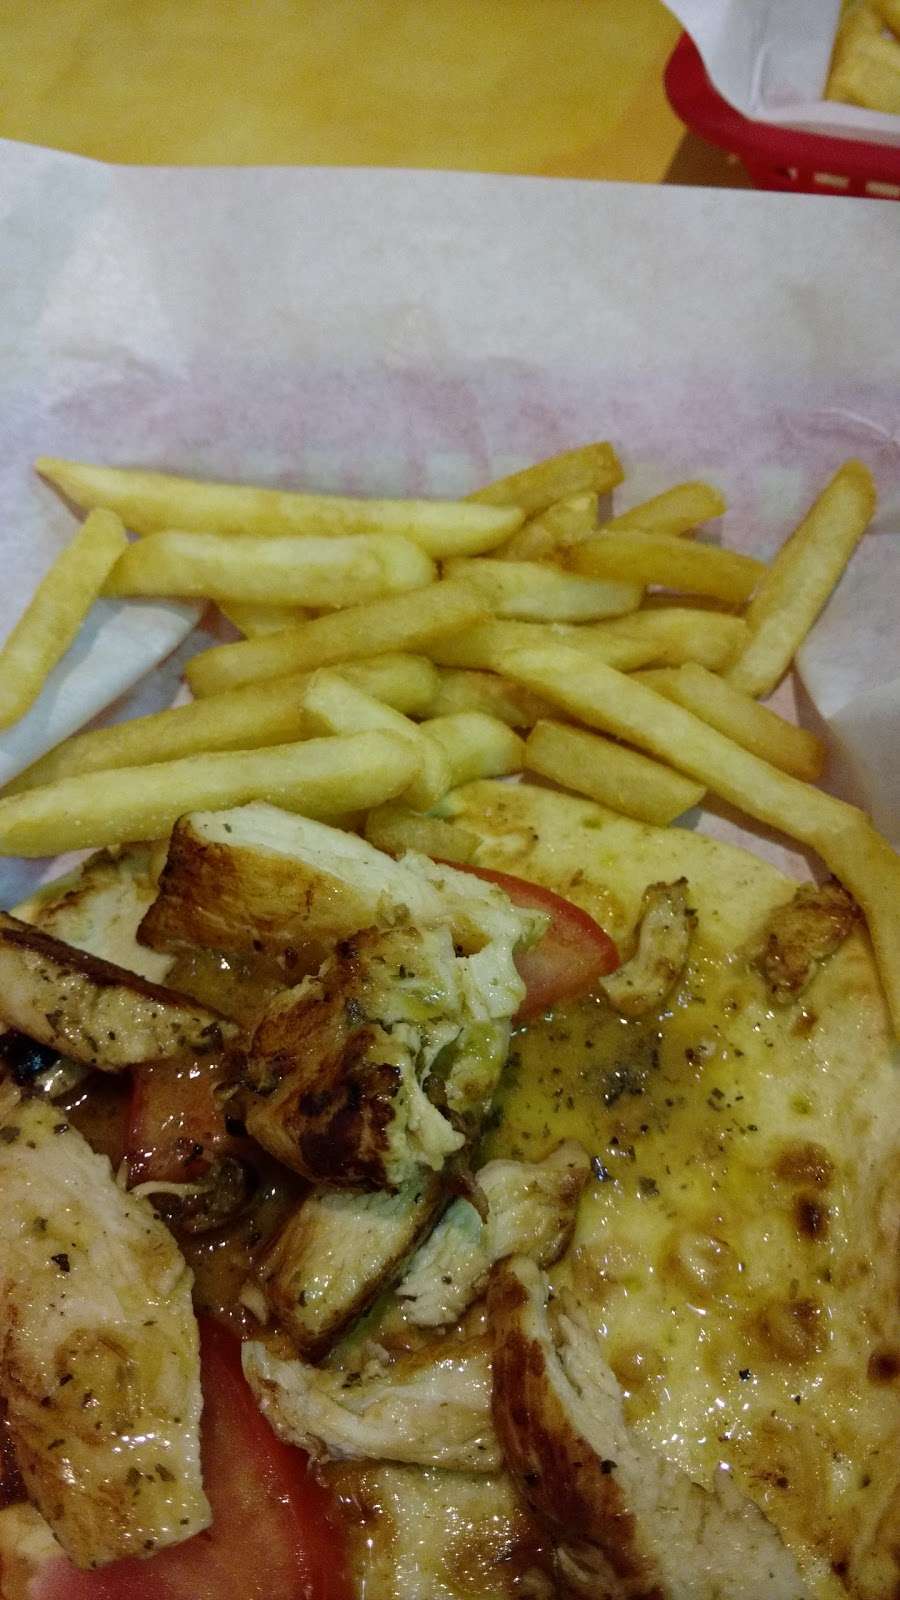 Georges Gyros Spot 2 | 1201 W 37th Ave, Hobart, IN 46342, USA | Phone: (219) 947-7919